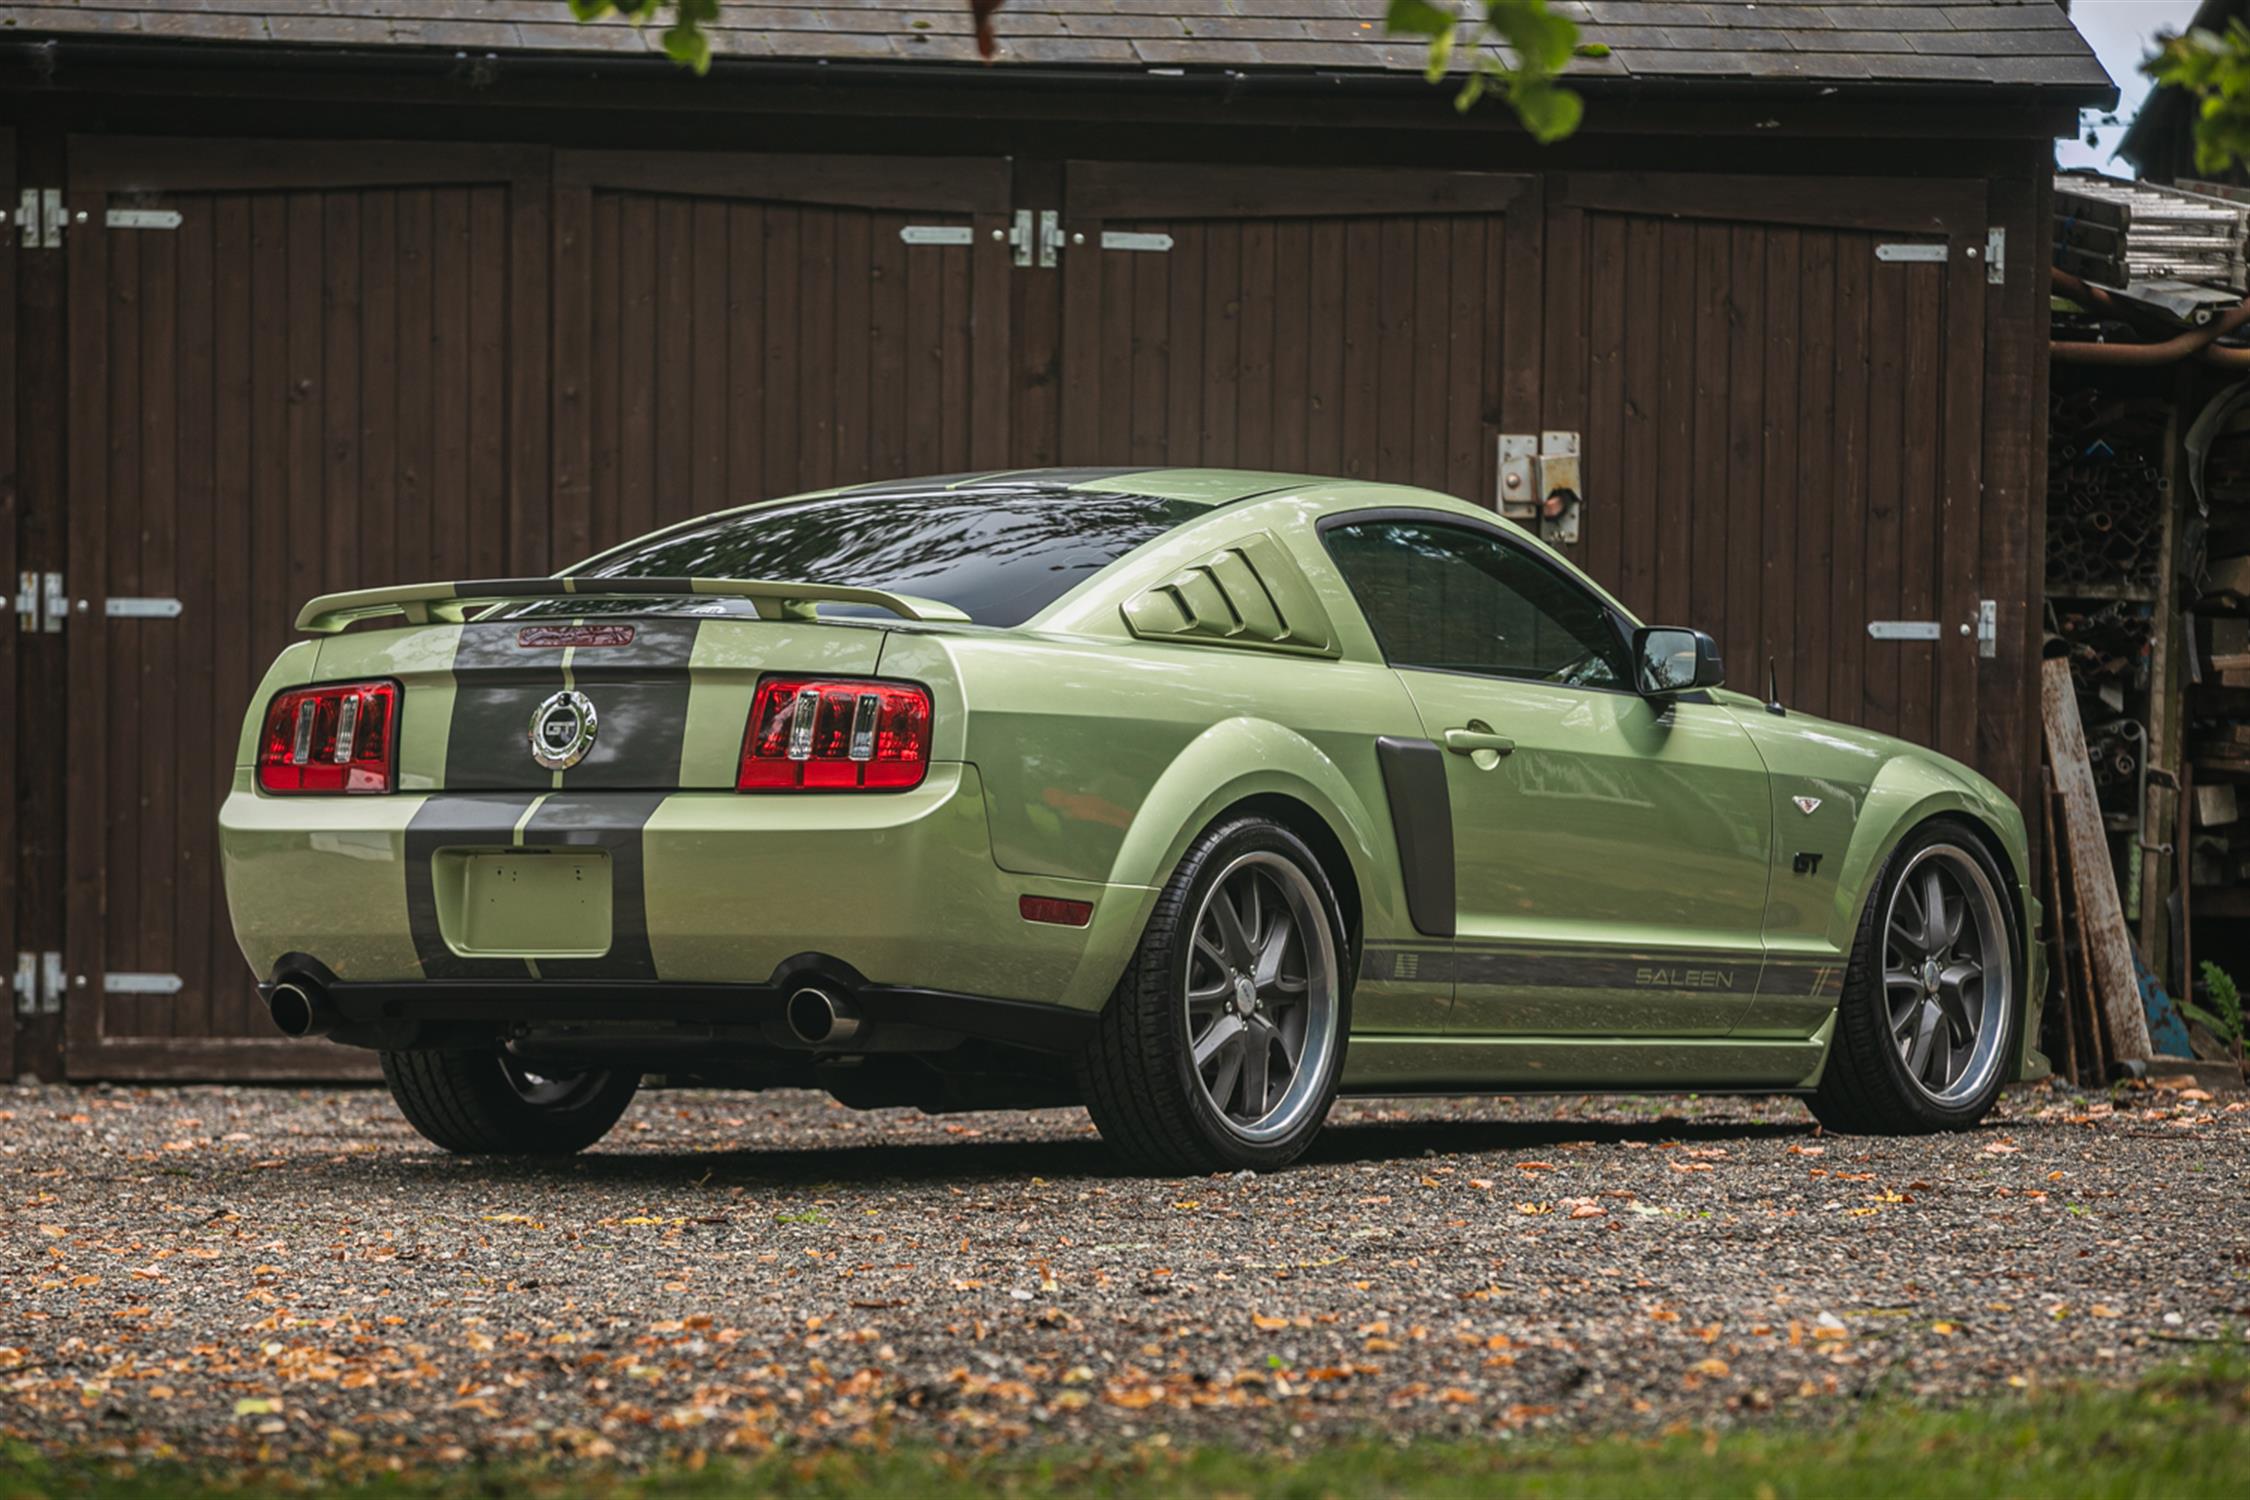 2005 Ford Mustang GT Premium Supercharged 4.6-Litre V8 Manual Saleen-homage - Image 4 of 10